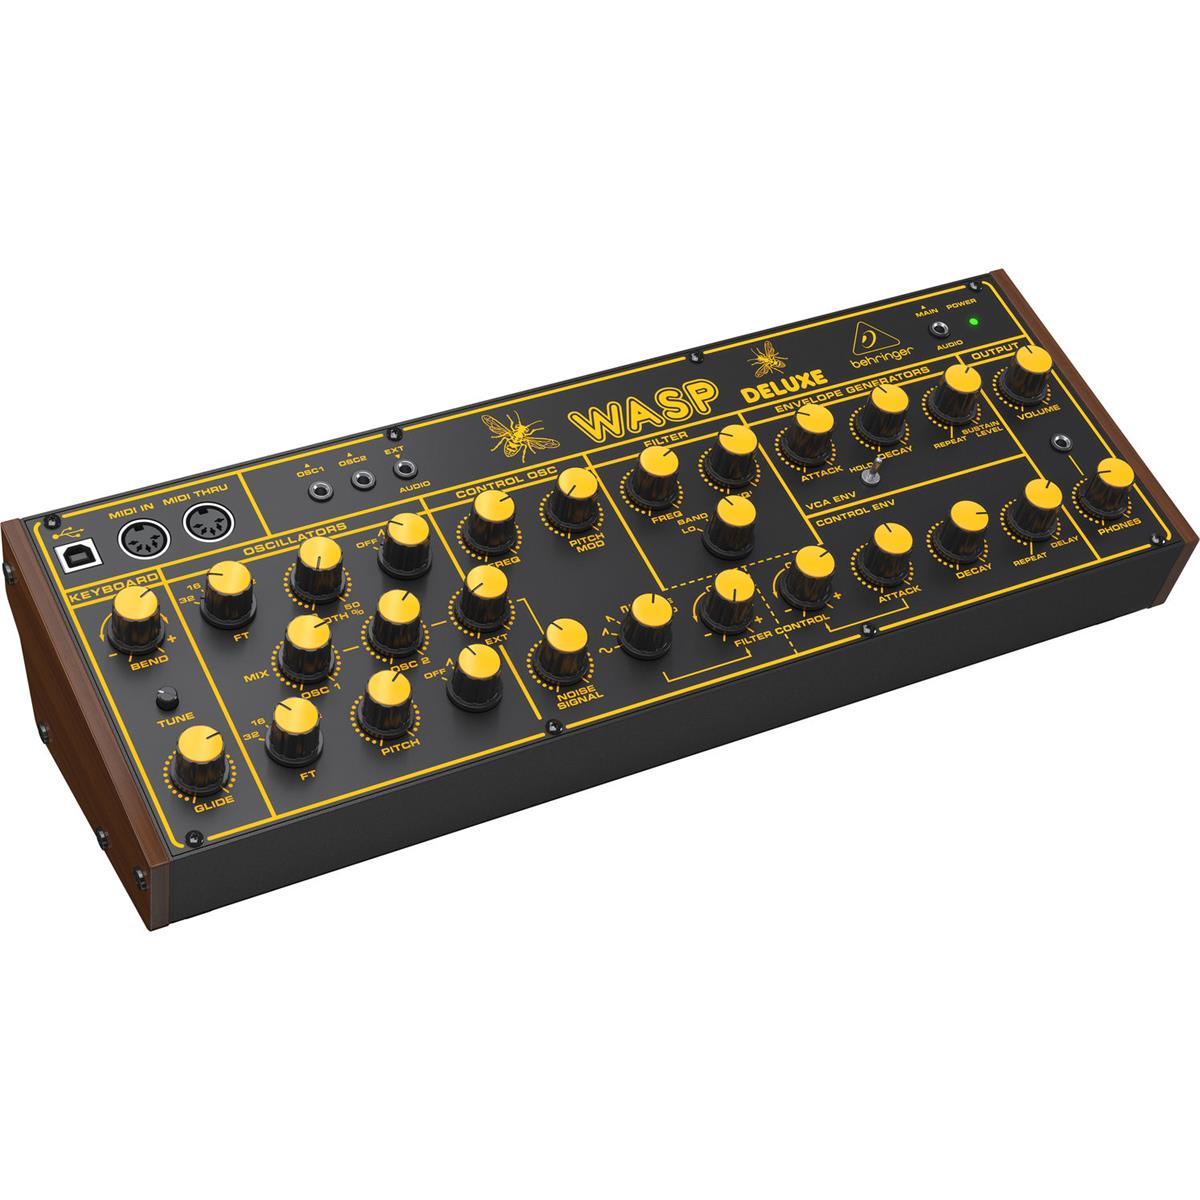 Image of Behringer WASP DELUXE Legendary Analog Synthesizer w/ Dual OSCs